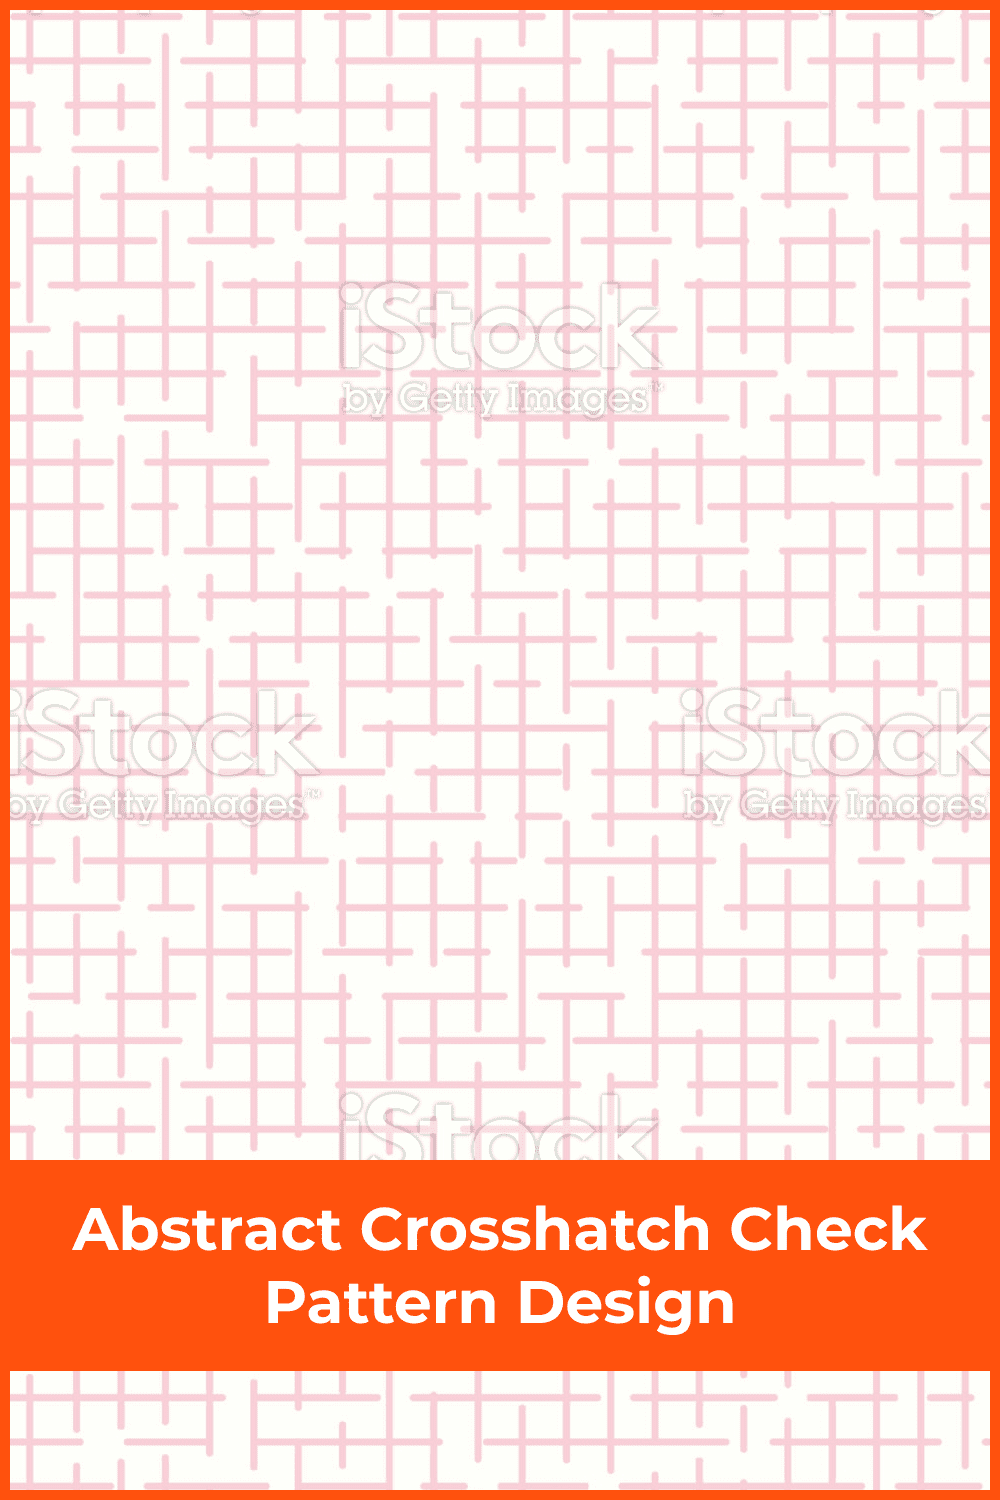 Abstract crosshatch check pattern.